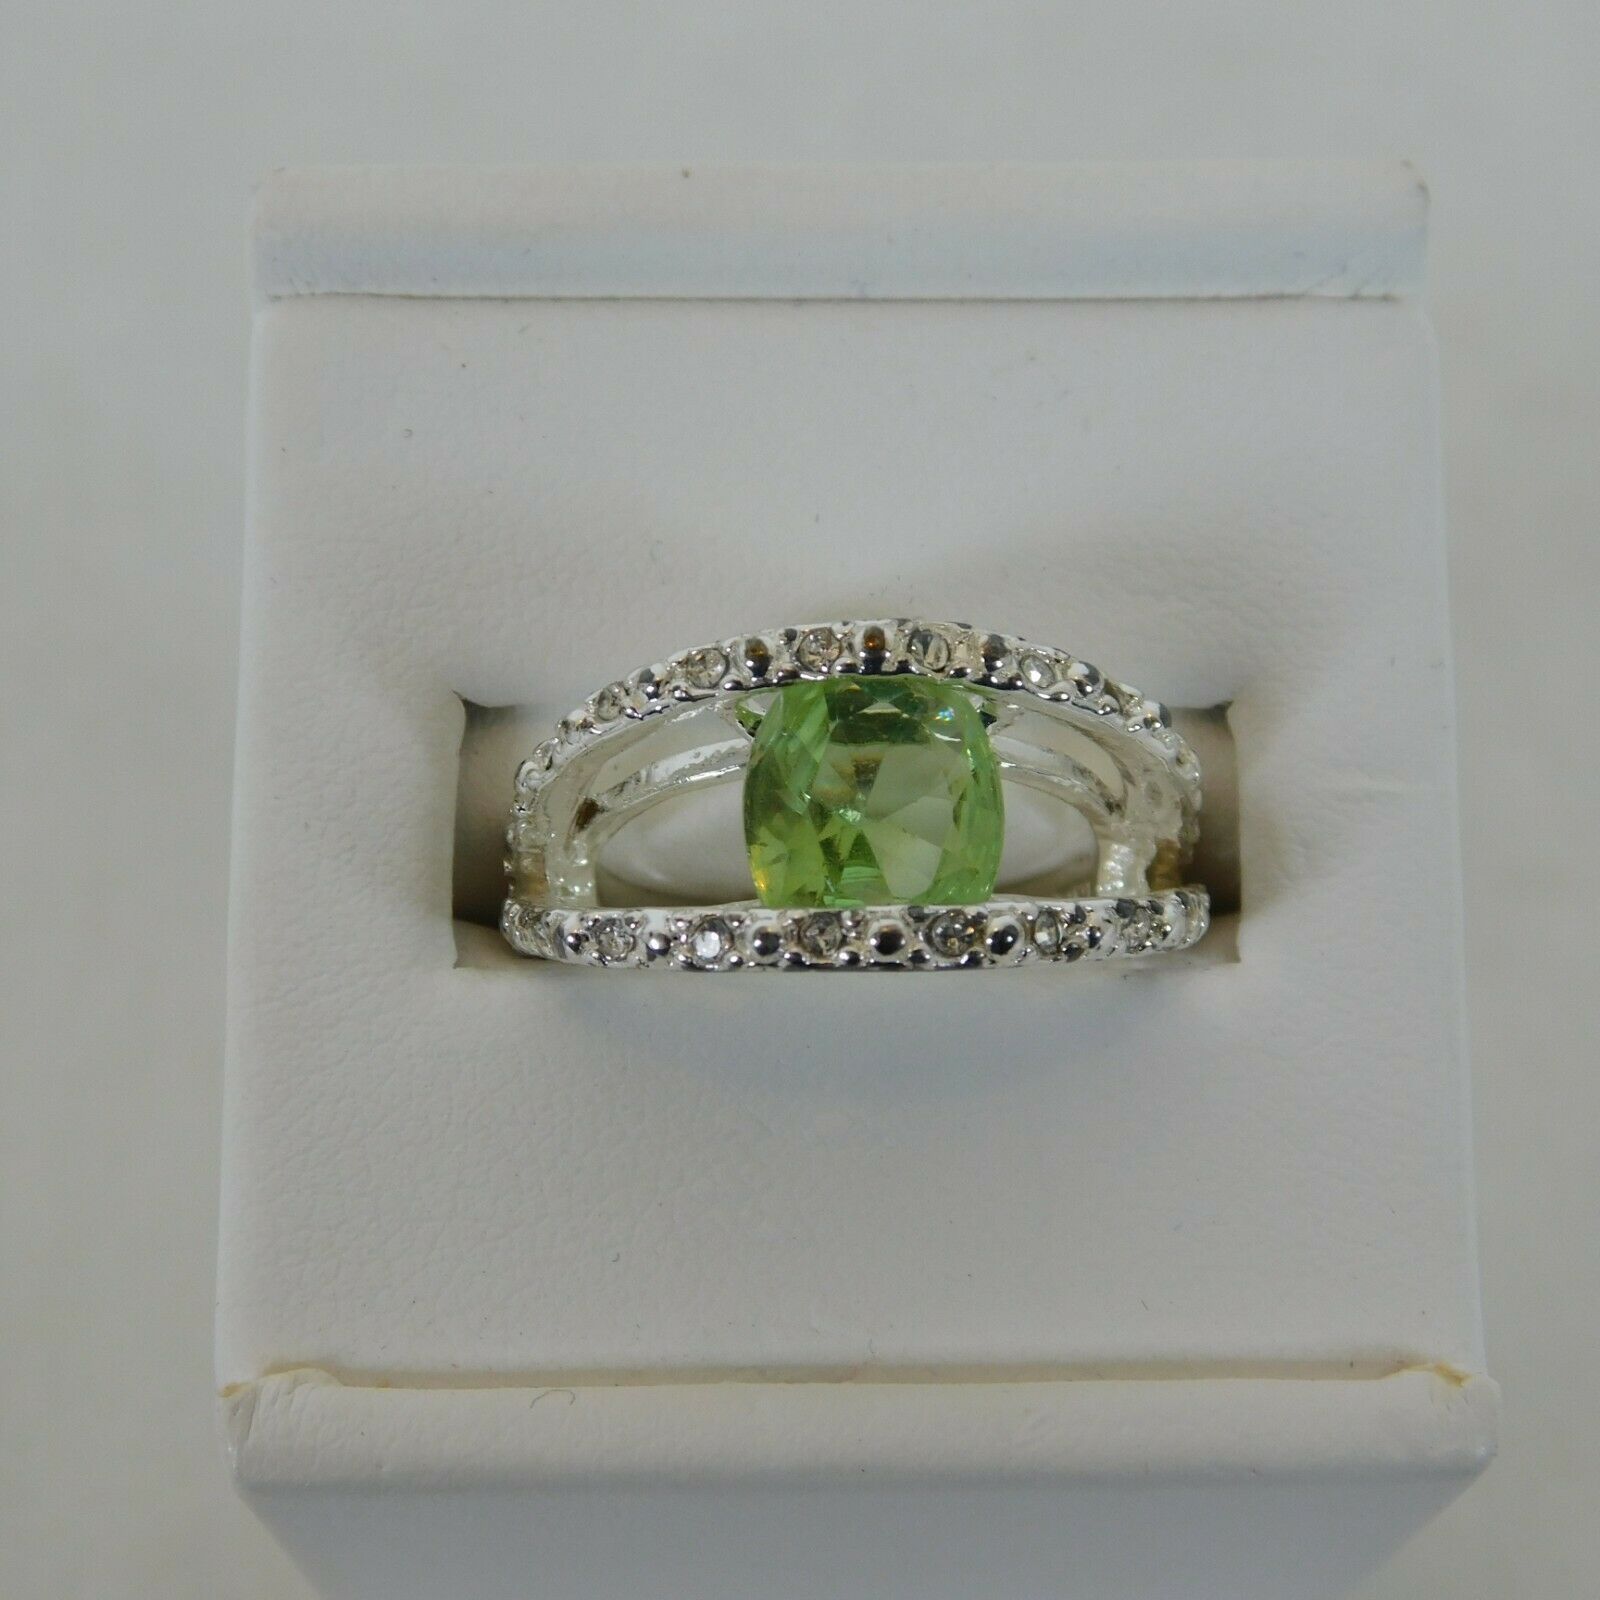 Envy Me Cocktail Ring by Avon Green Rhinestone Silver Tone New Box Size 6 Bling - $19.35